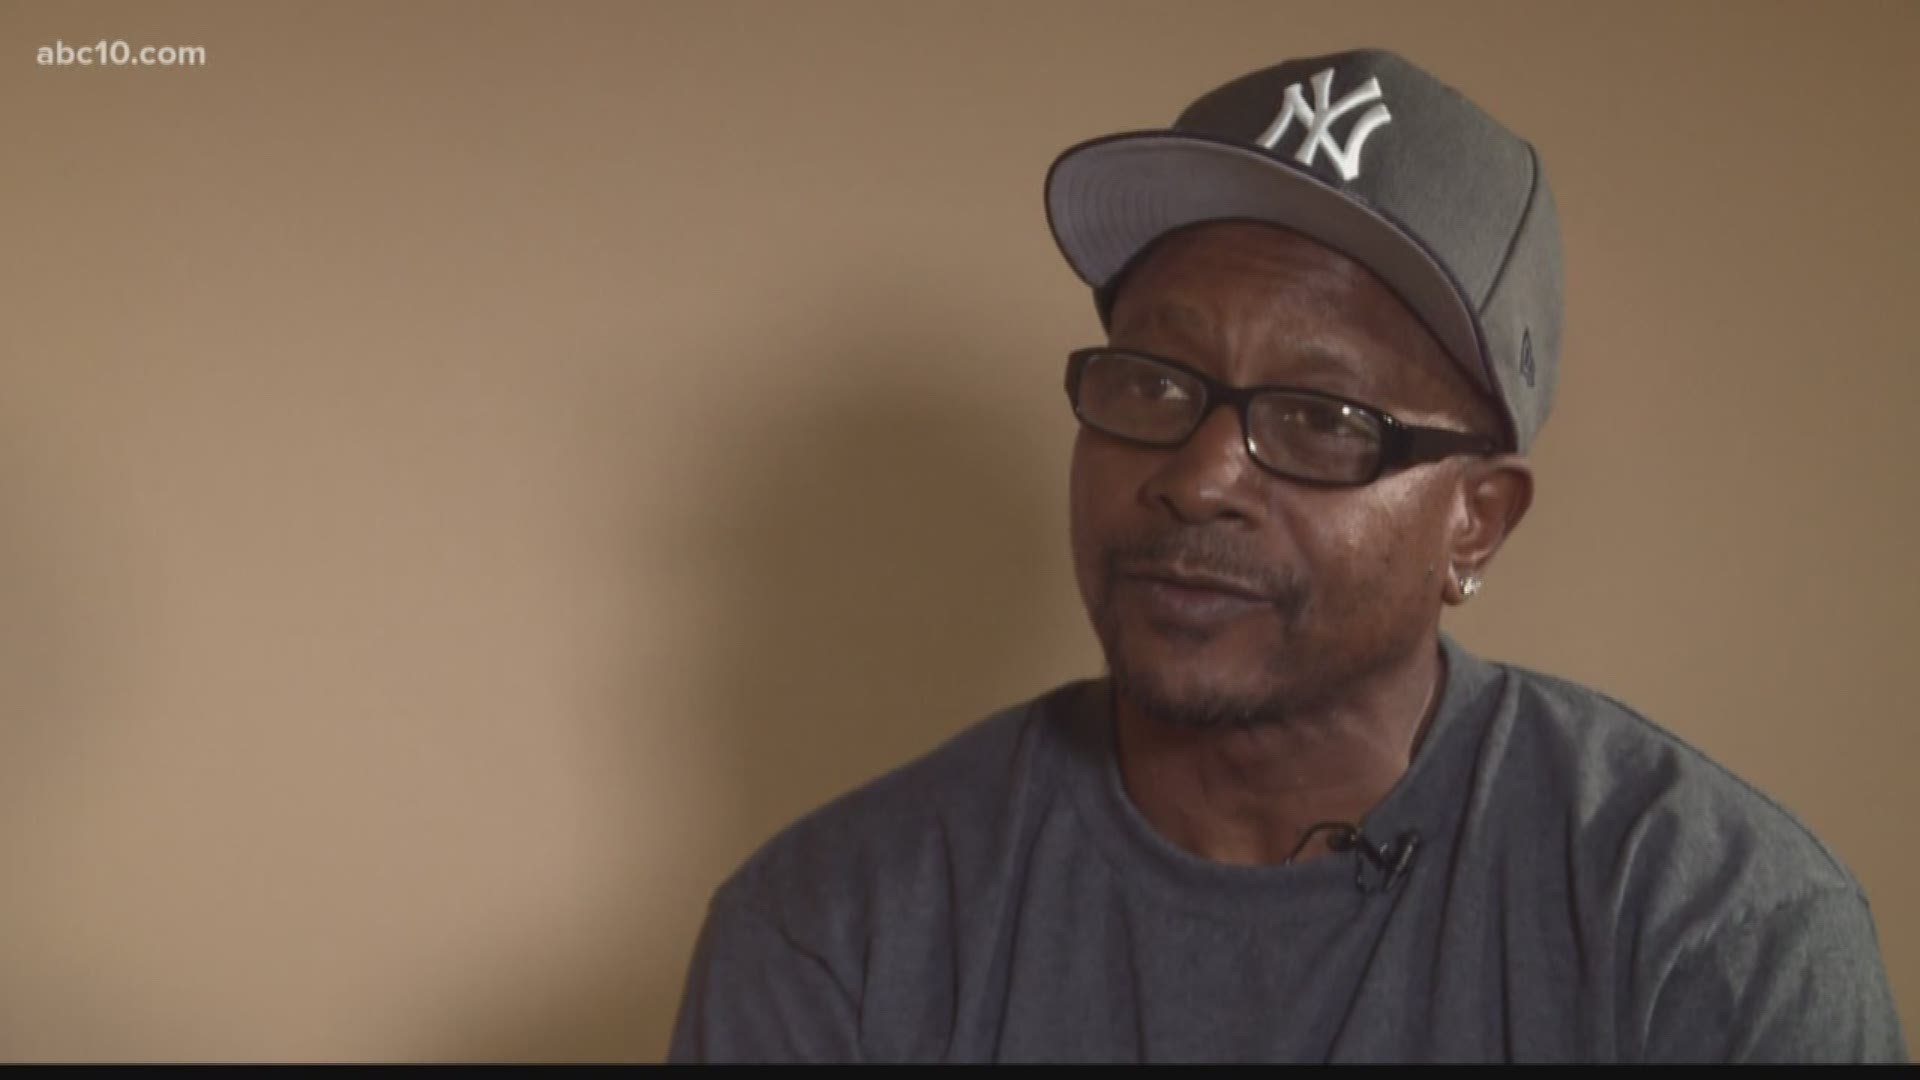 ABC10's Keristen Holmes spoke to another family right here in the city who knows exactly what the Clark Family is going through right now. (April 2, 2018)